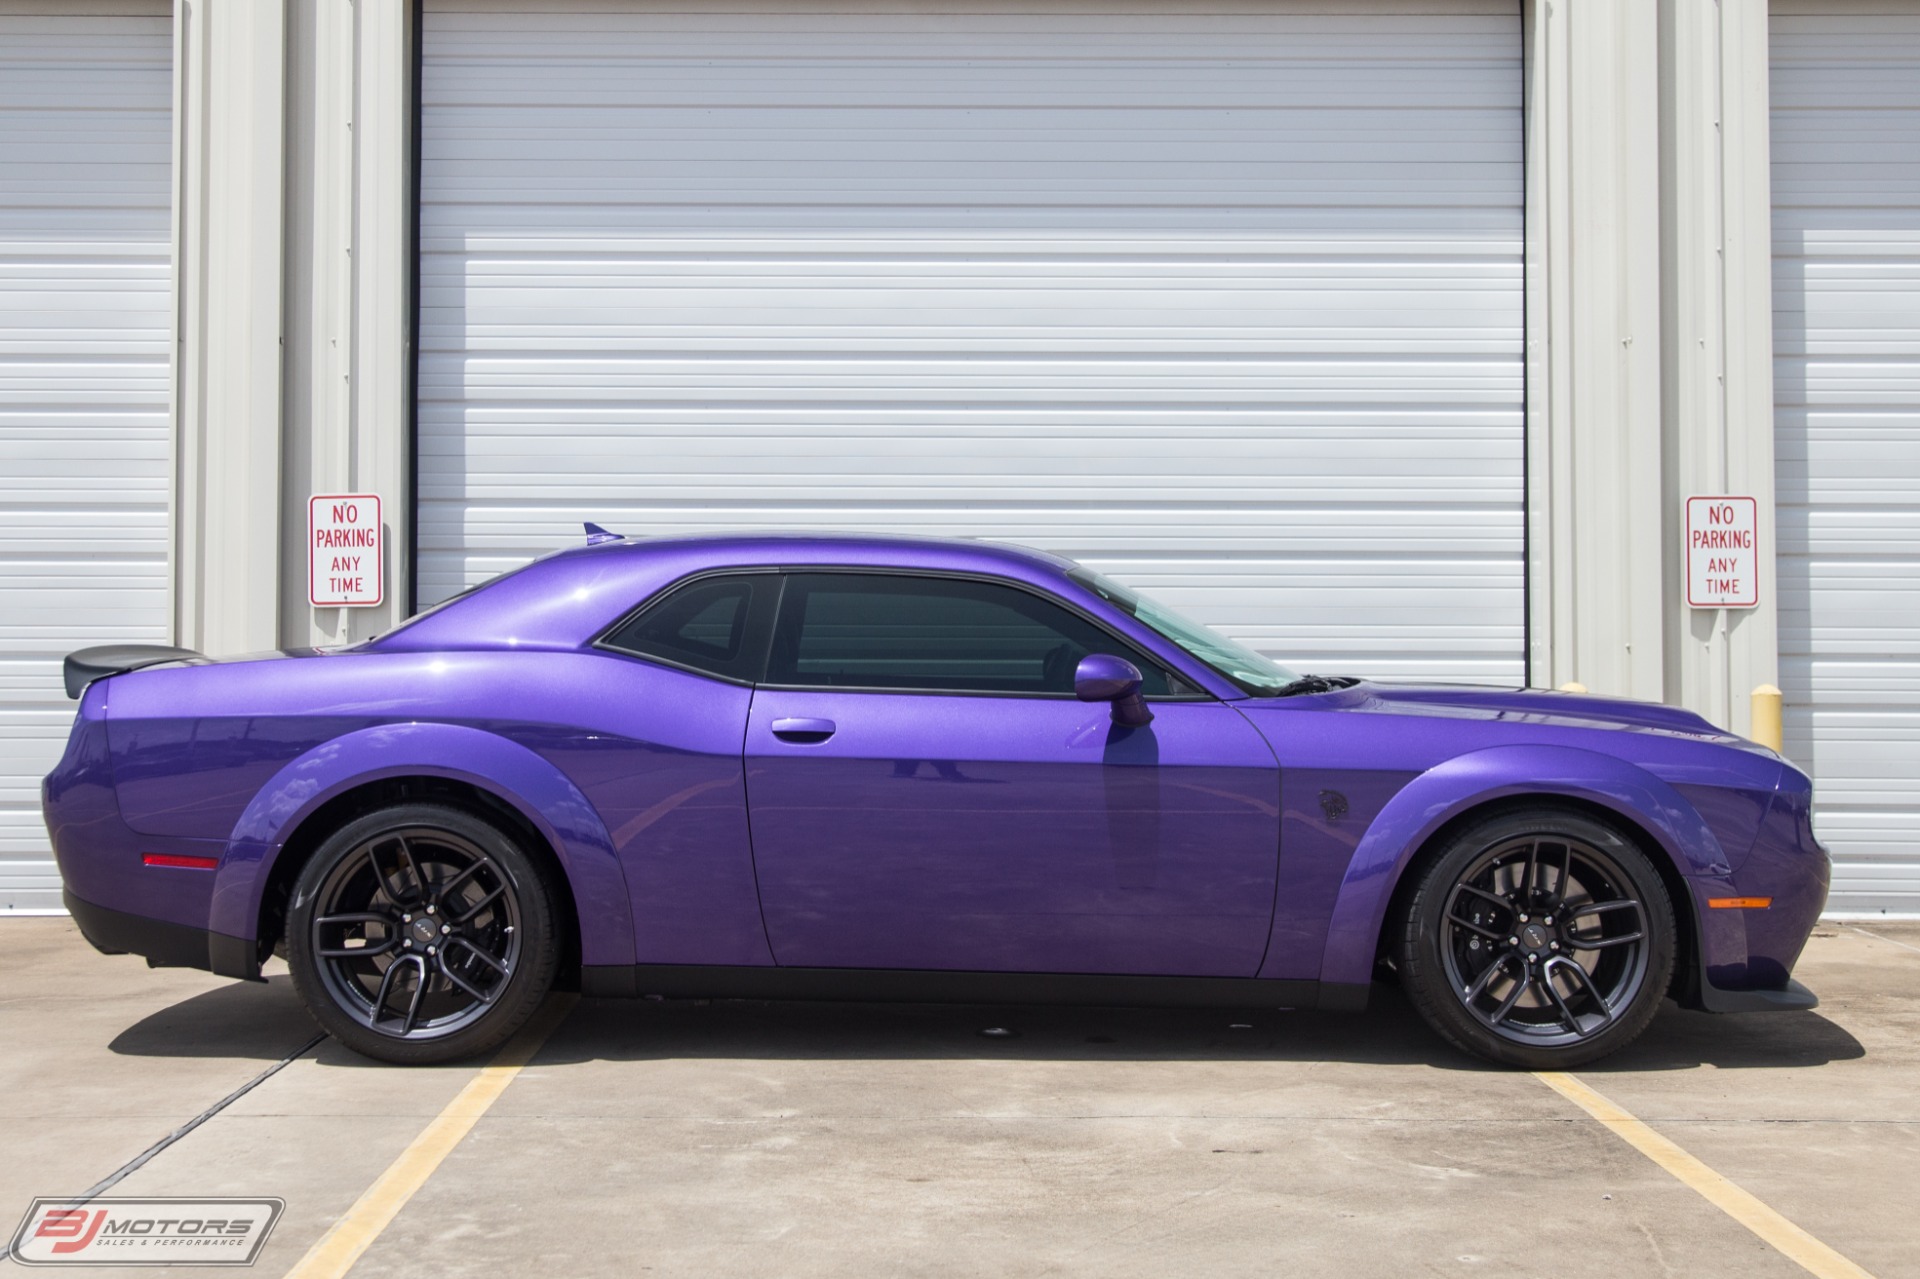 Used 2019 Dodge Challenger Srt Hellcat Redeye For Sale Special Pricing 